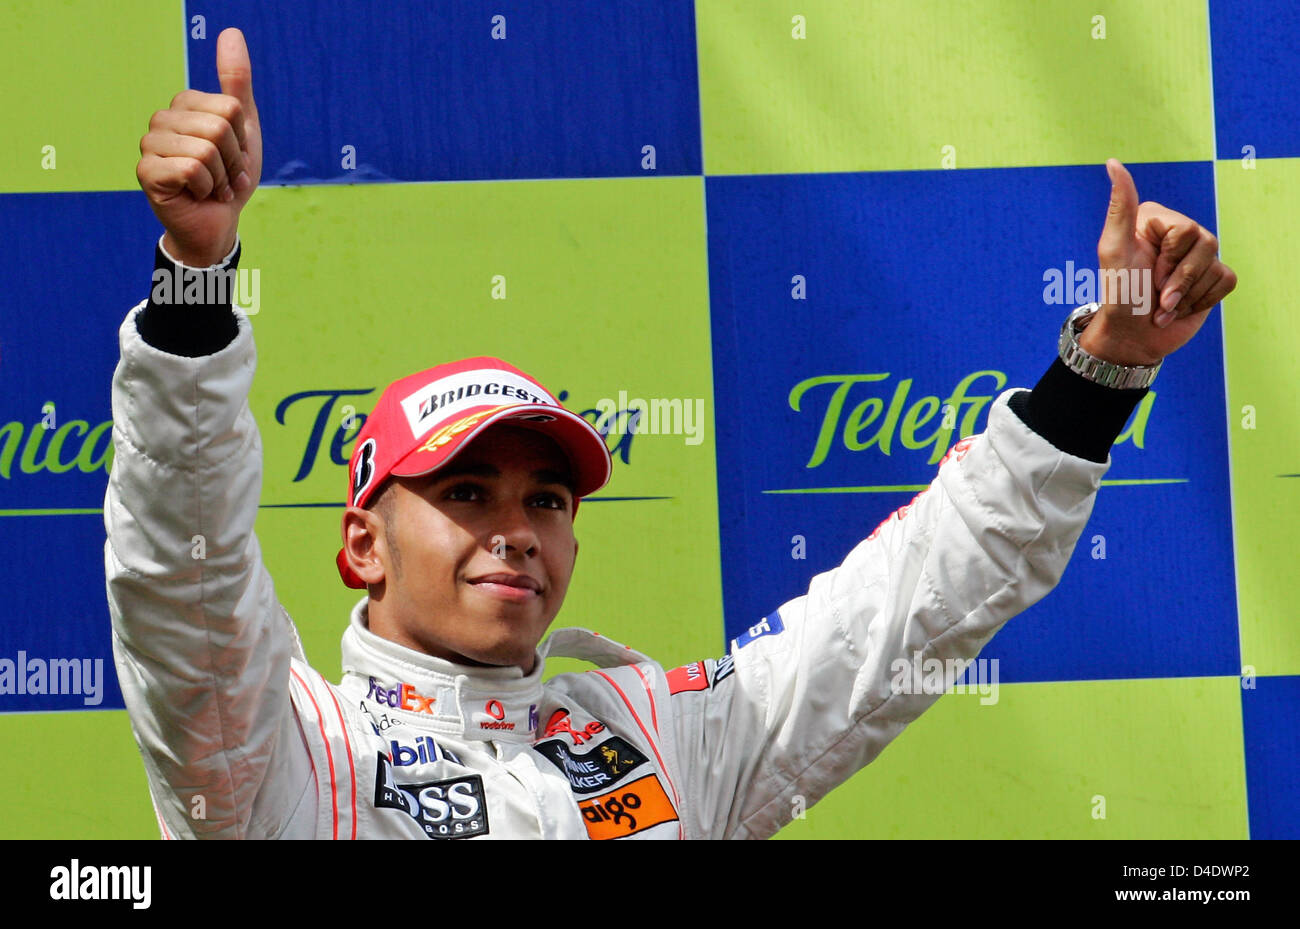 British Formula One driver Lewis Hamilton of McLaren Mercedes cheers about his third place in the Formula 1 Grand Prix of Spain at Circuit de Catalunya in Montmelo near Barcelona, Spain, 27 April 2008. Photo: FELIX HEYDER Stock Photo